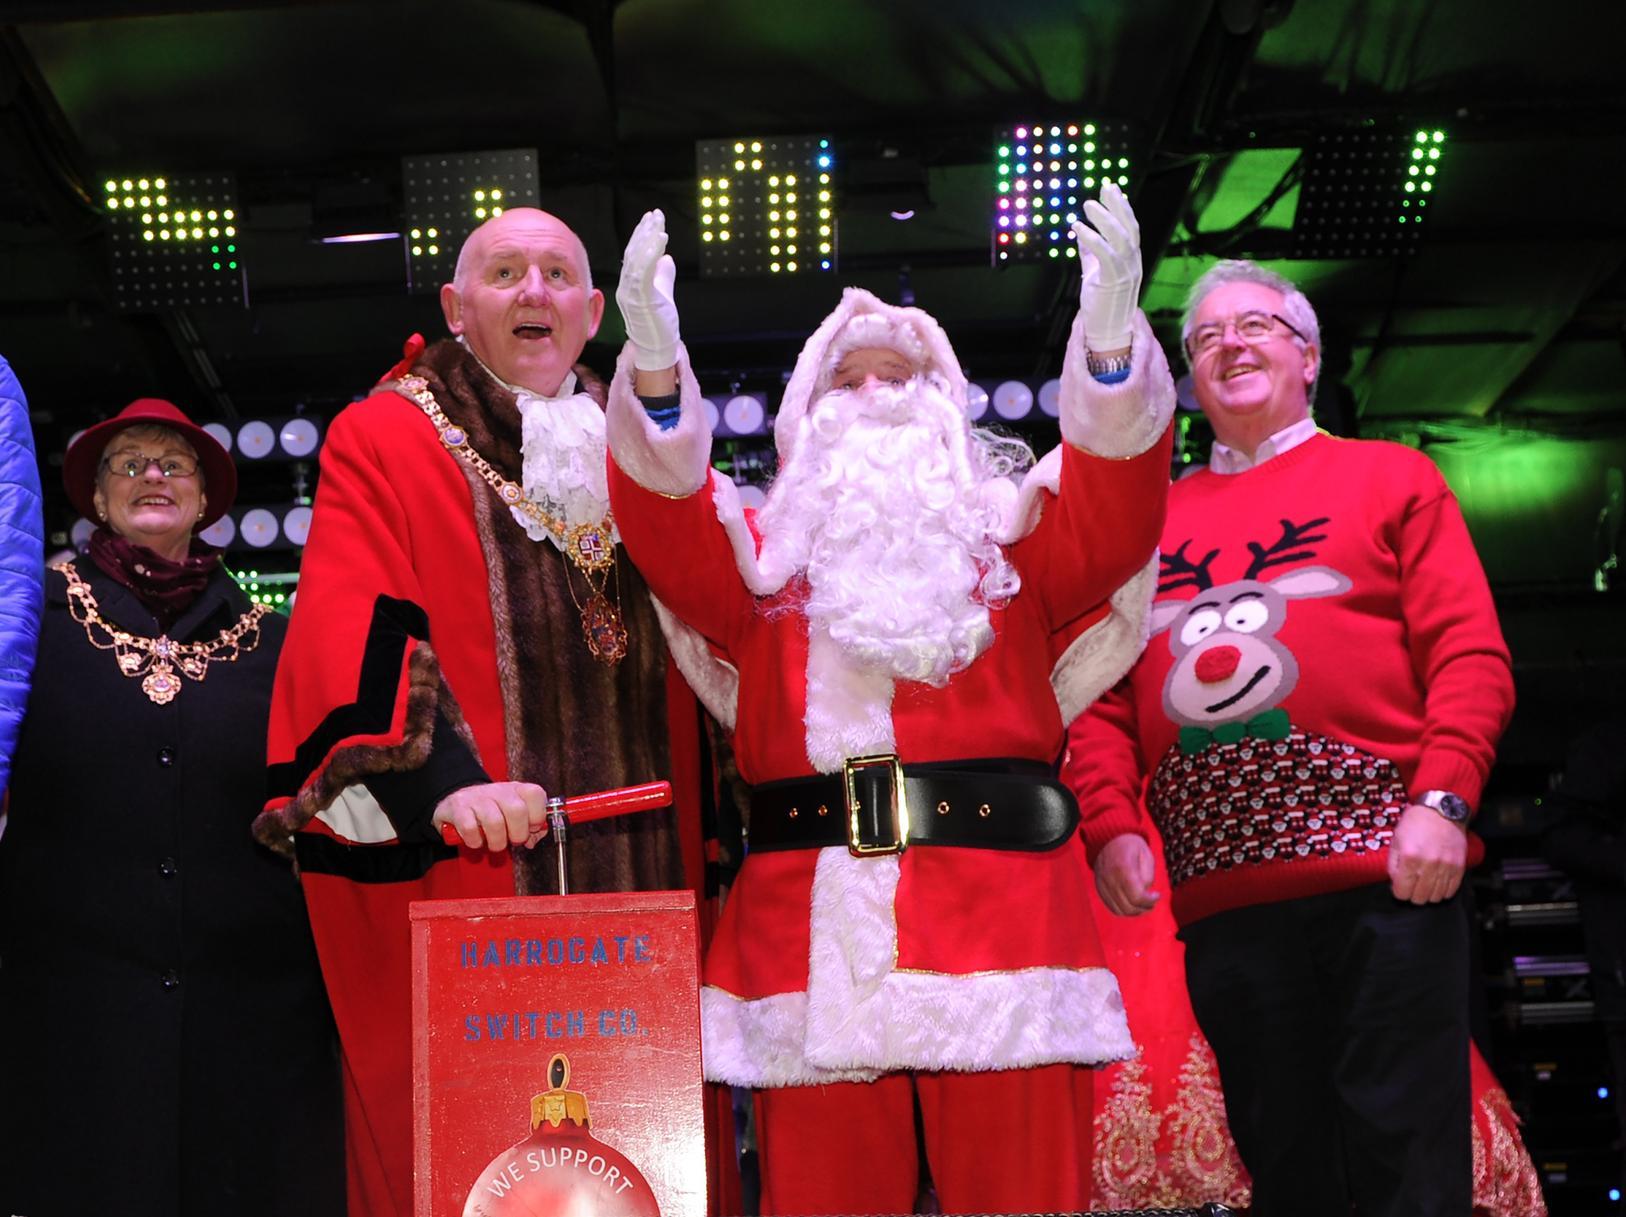 The Mayor of the Borough of Harrogate, Coun Stuart Martin, switches on the Christmas lights with Father Christmas.